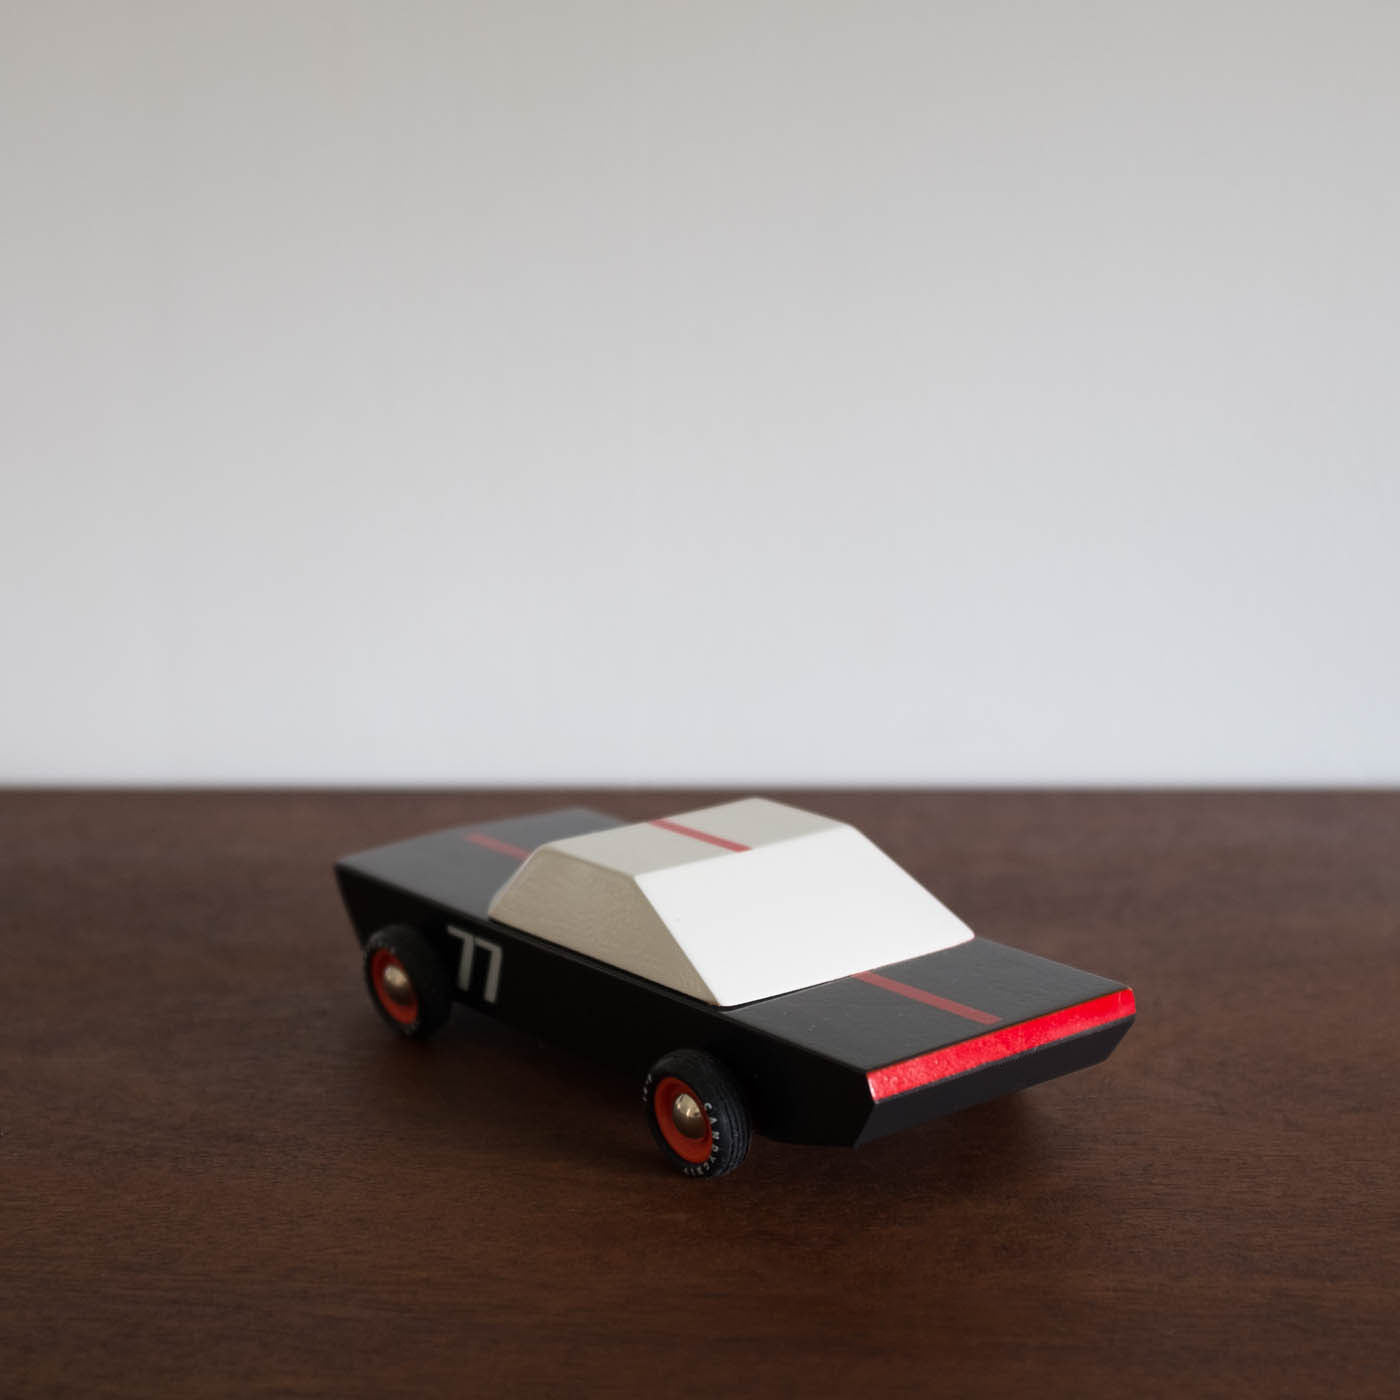 Carbon 77 Wooden Toy Car